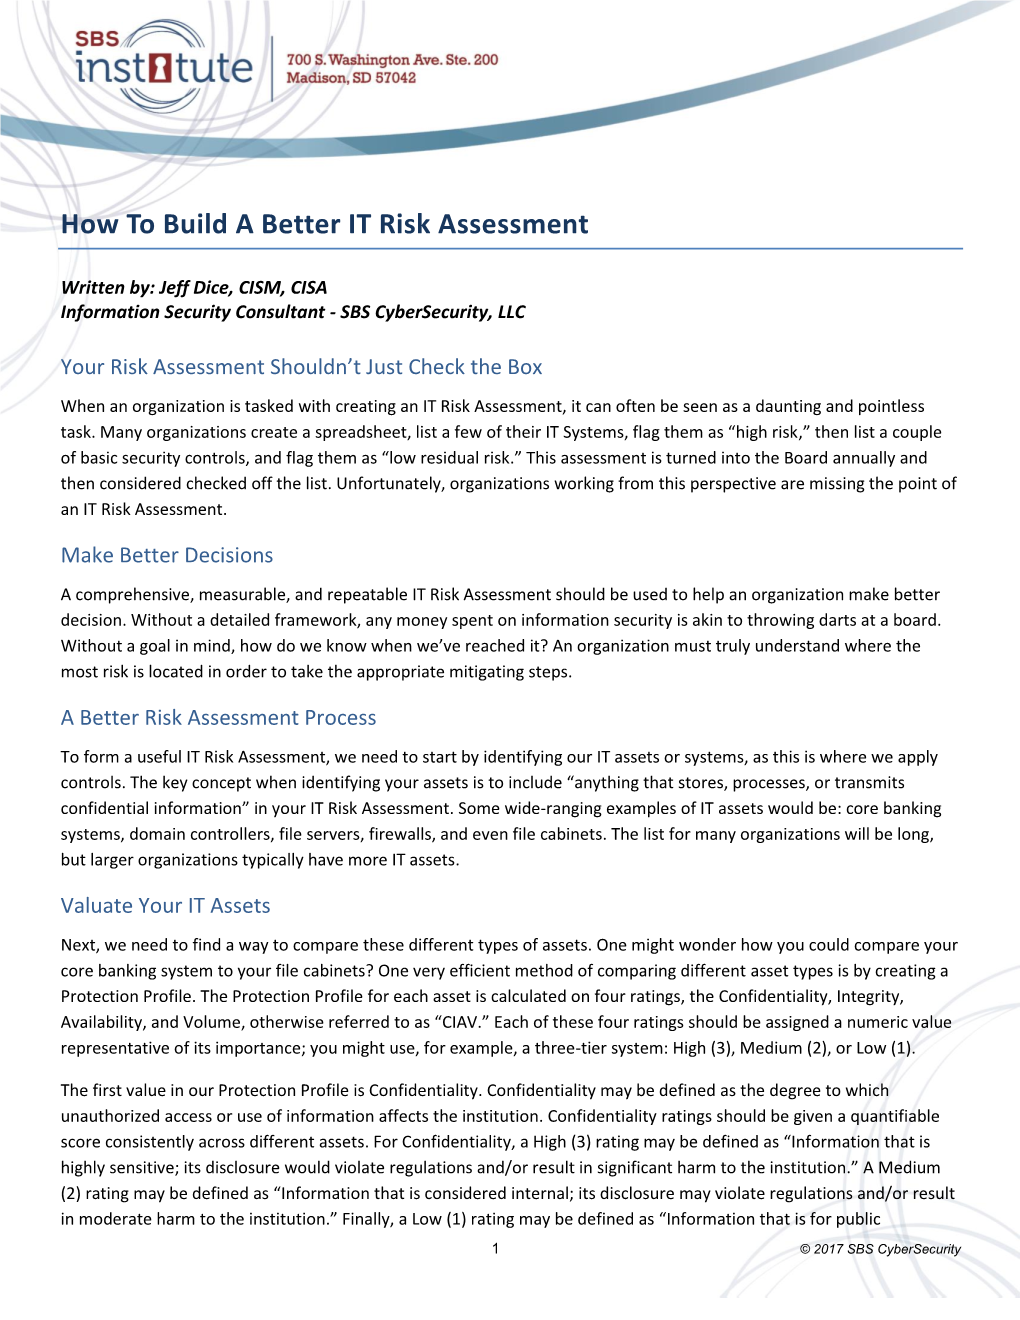 How to Build a Better IT Risk Assessment